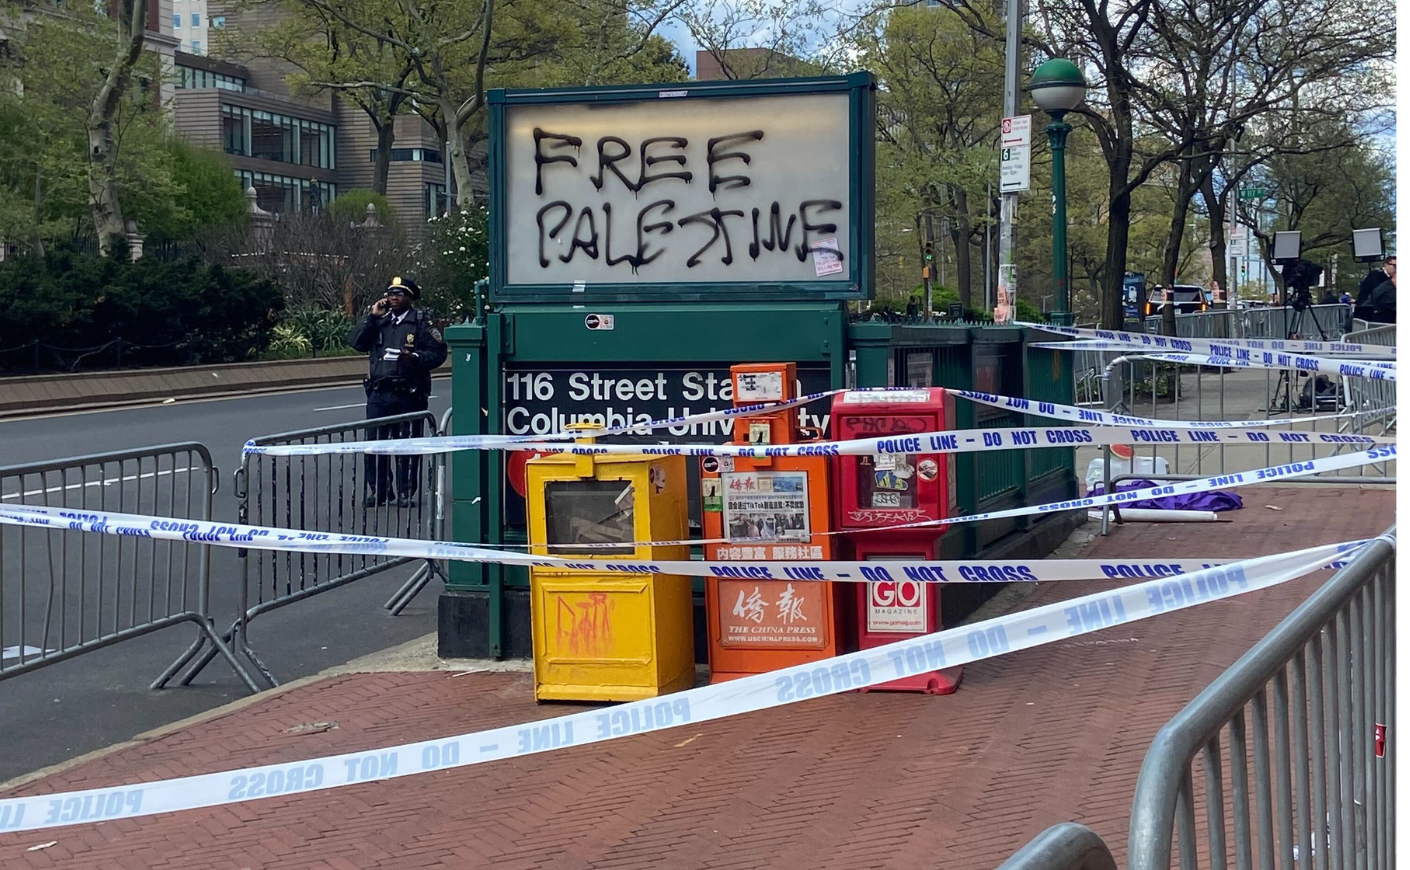 Police tape blocks off pavement near a subway entrance at Columbia that's been spray-painted with "Free Palestine"